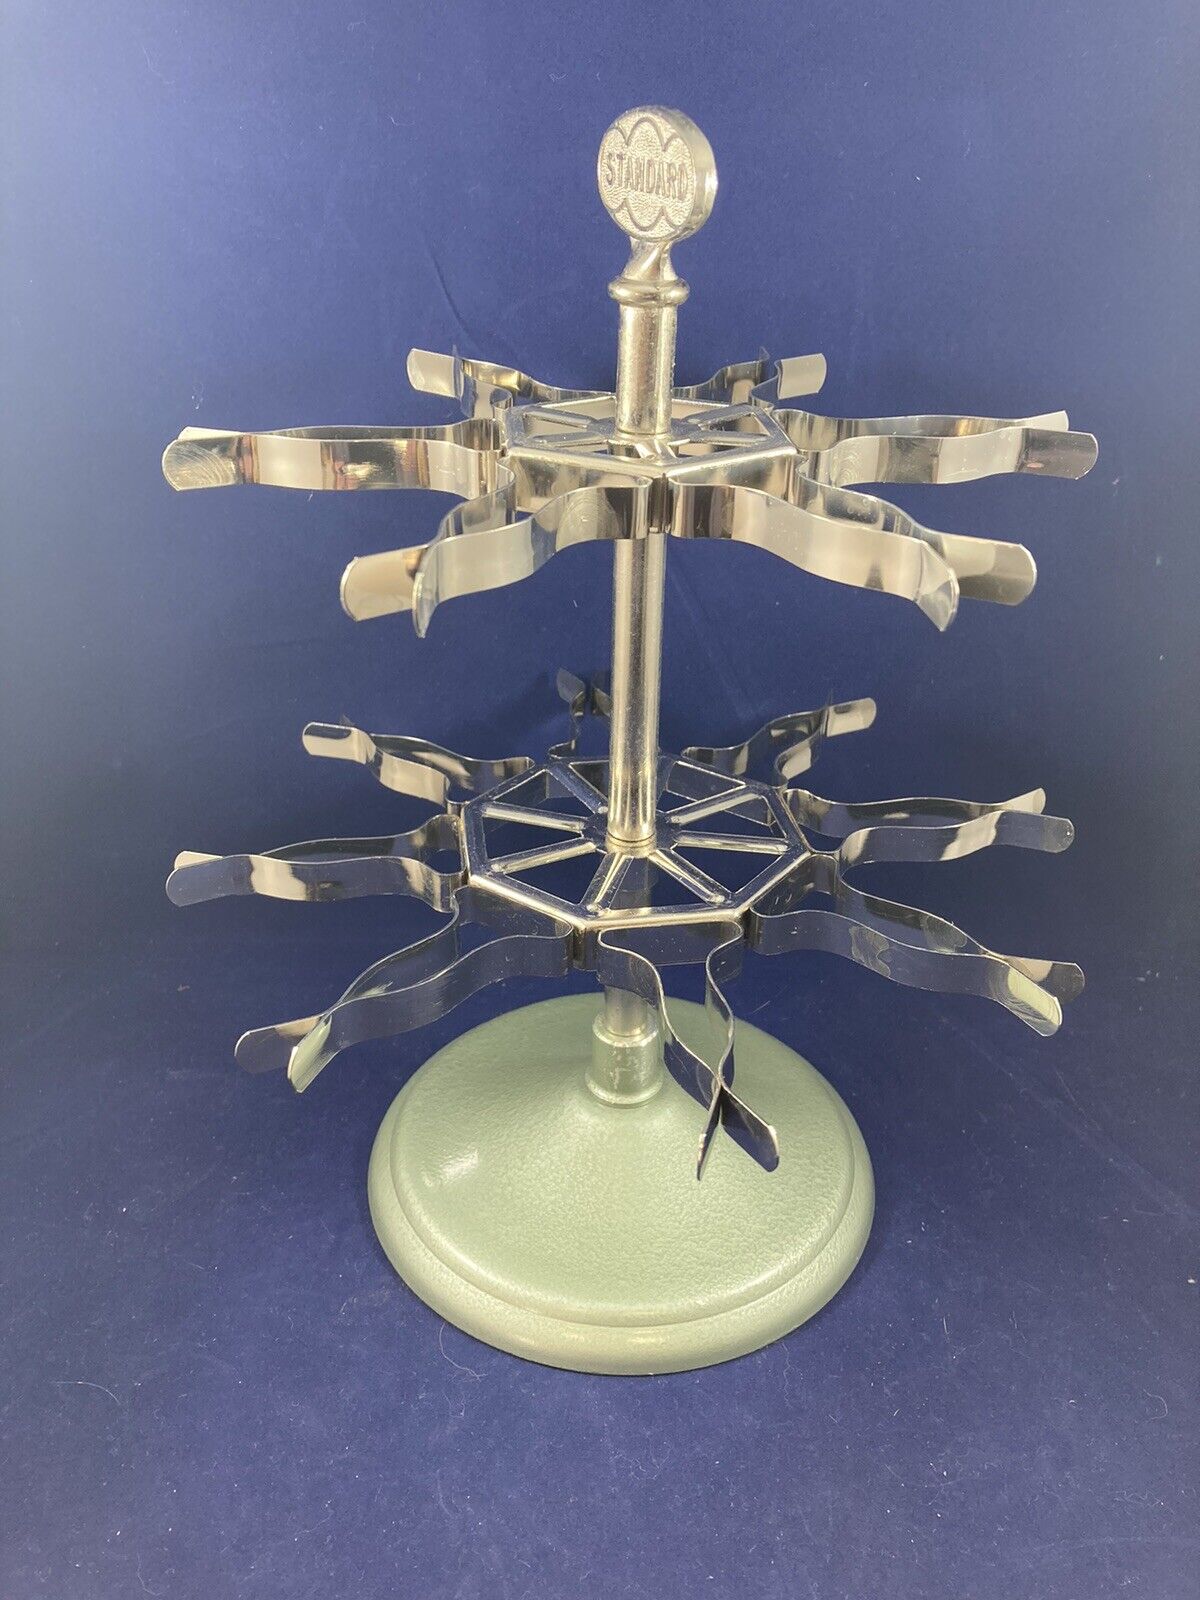 Vintage STANDARD Rotating Rubber Stamp Rack Carousel Display Stand-Holds 14